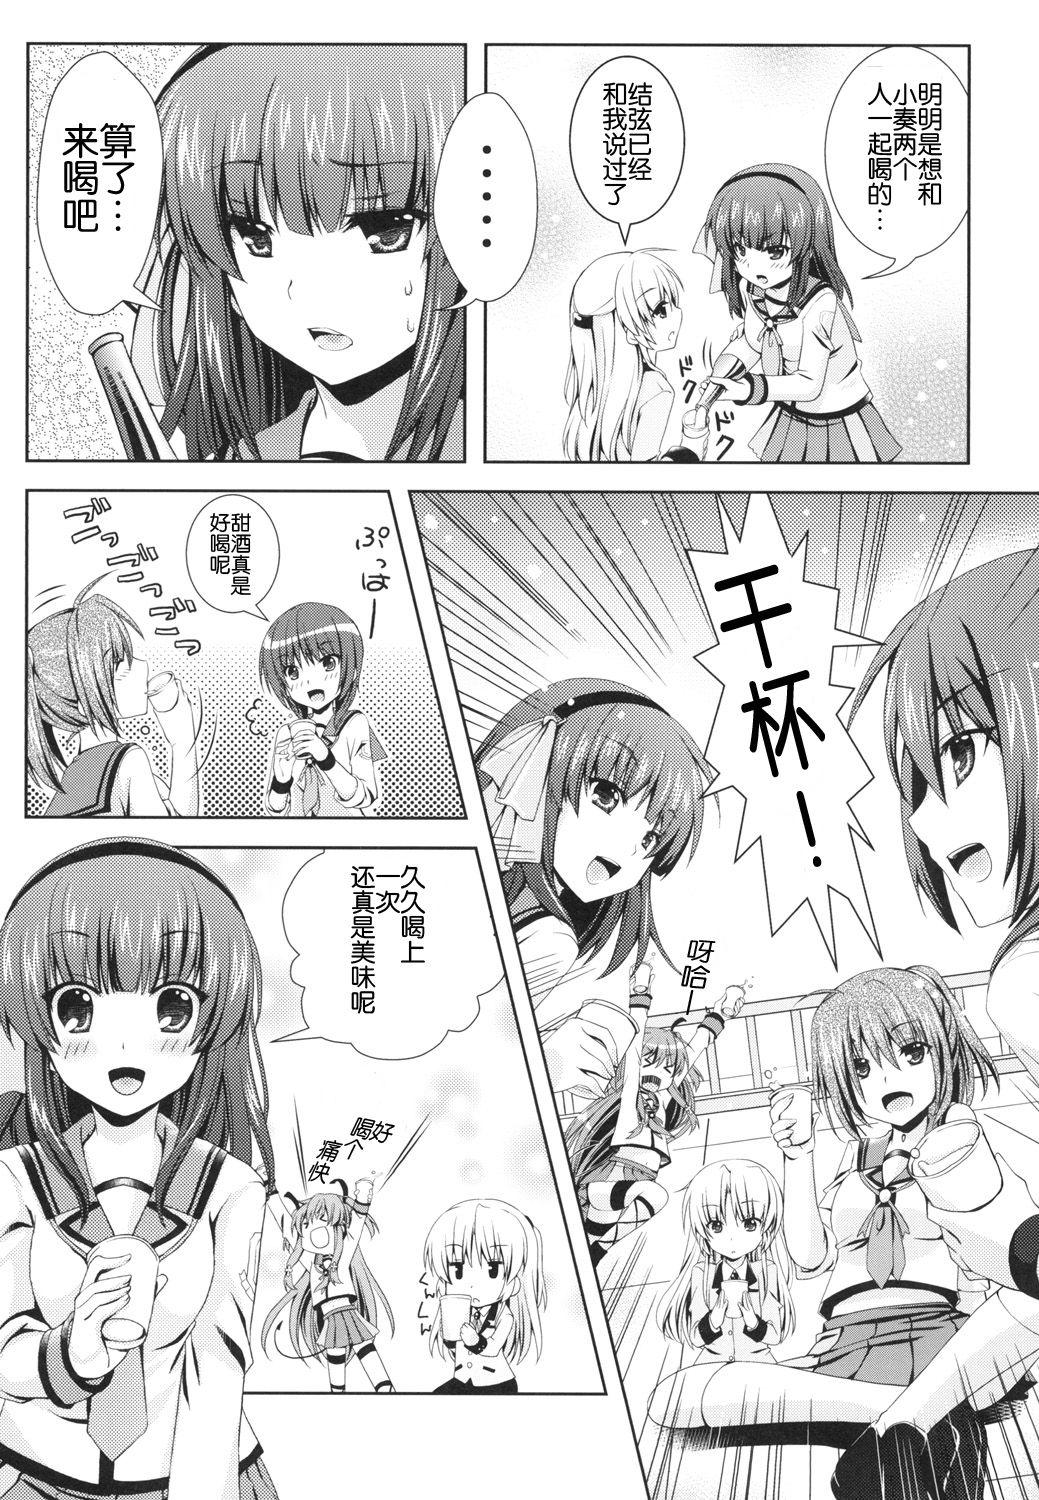 With Kanade Musou - Angel beats Step Sister - Page 8